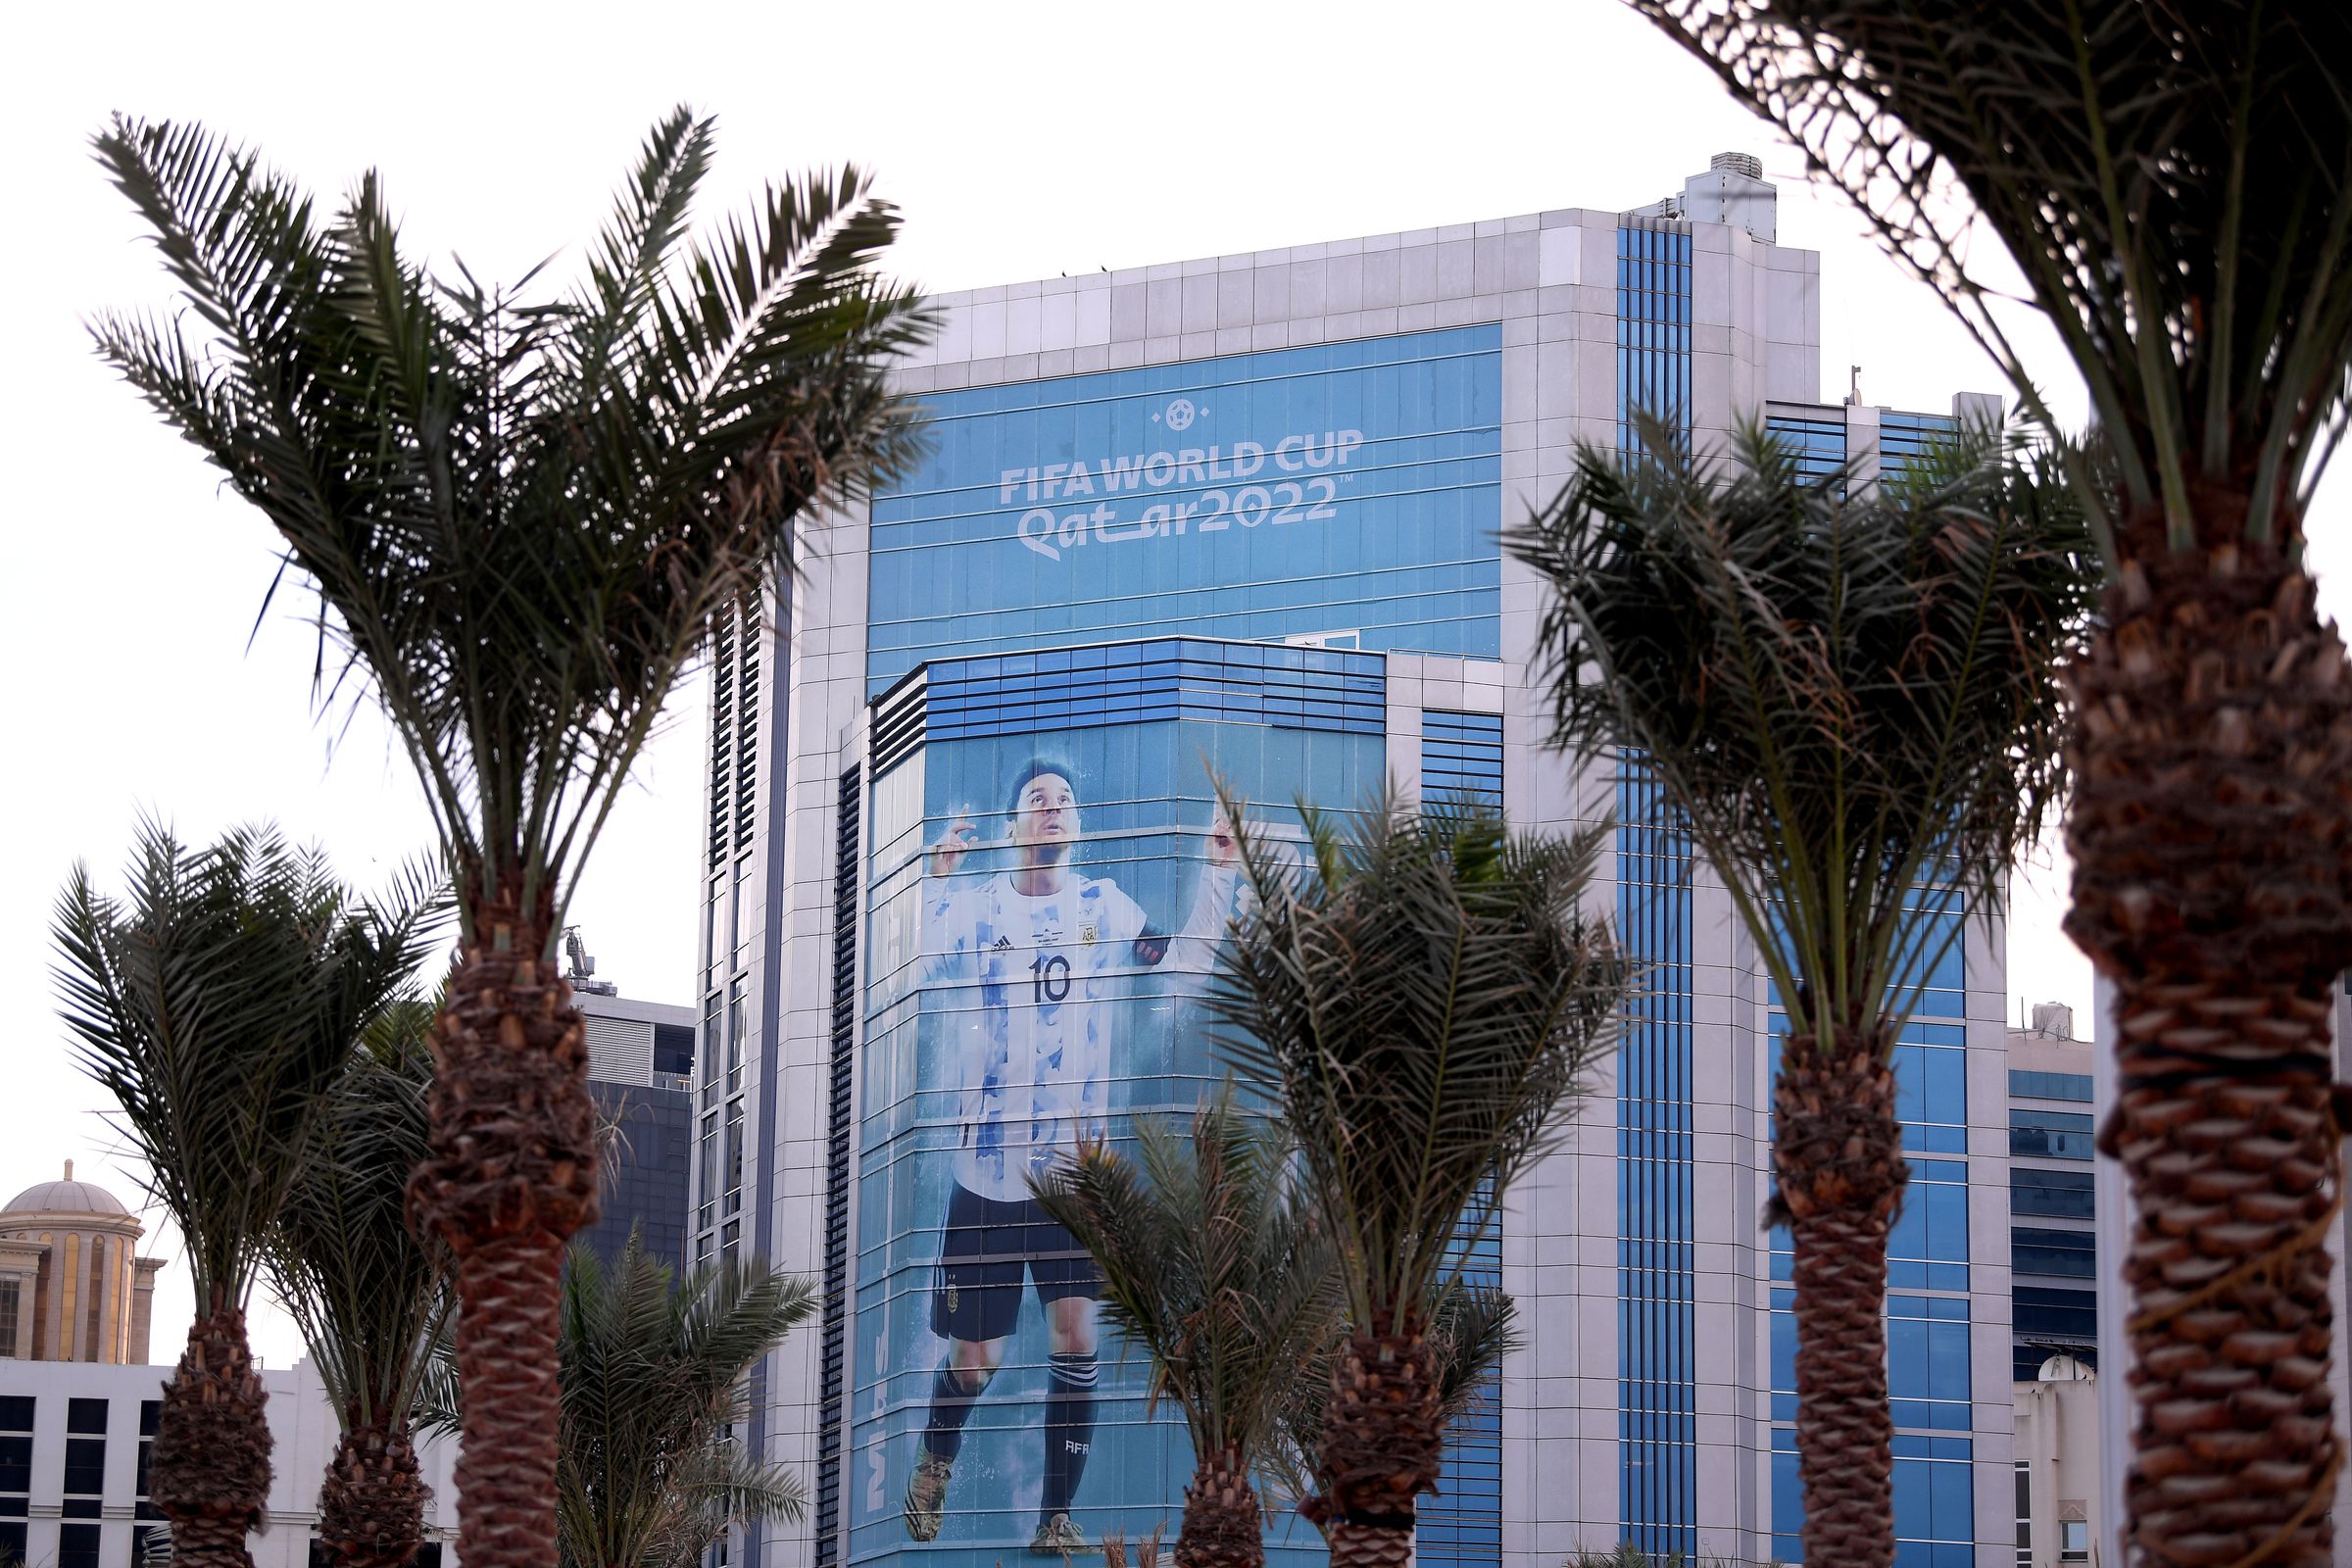 A giant image of Lionel Messi of Argentina is seen on a building ahead of the FIFA World Cup 2022 in Qatar.